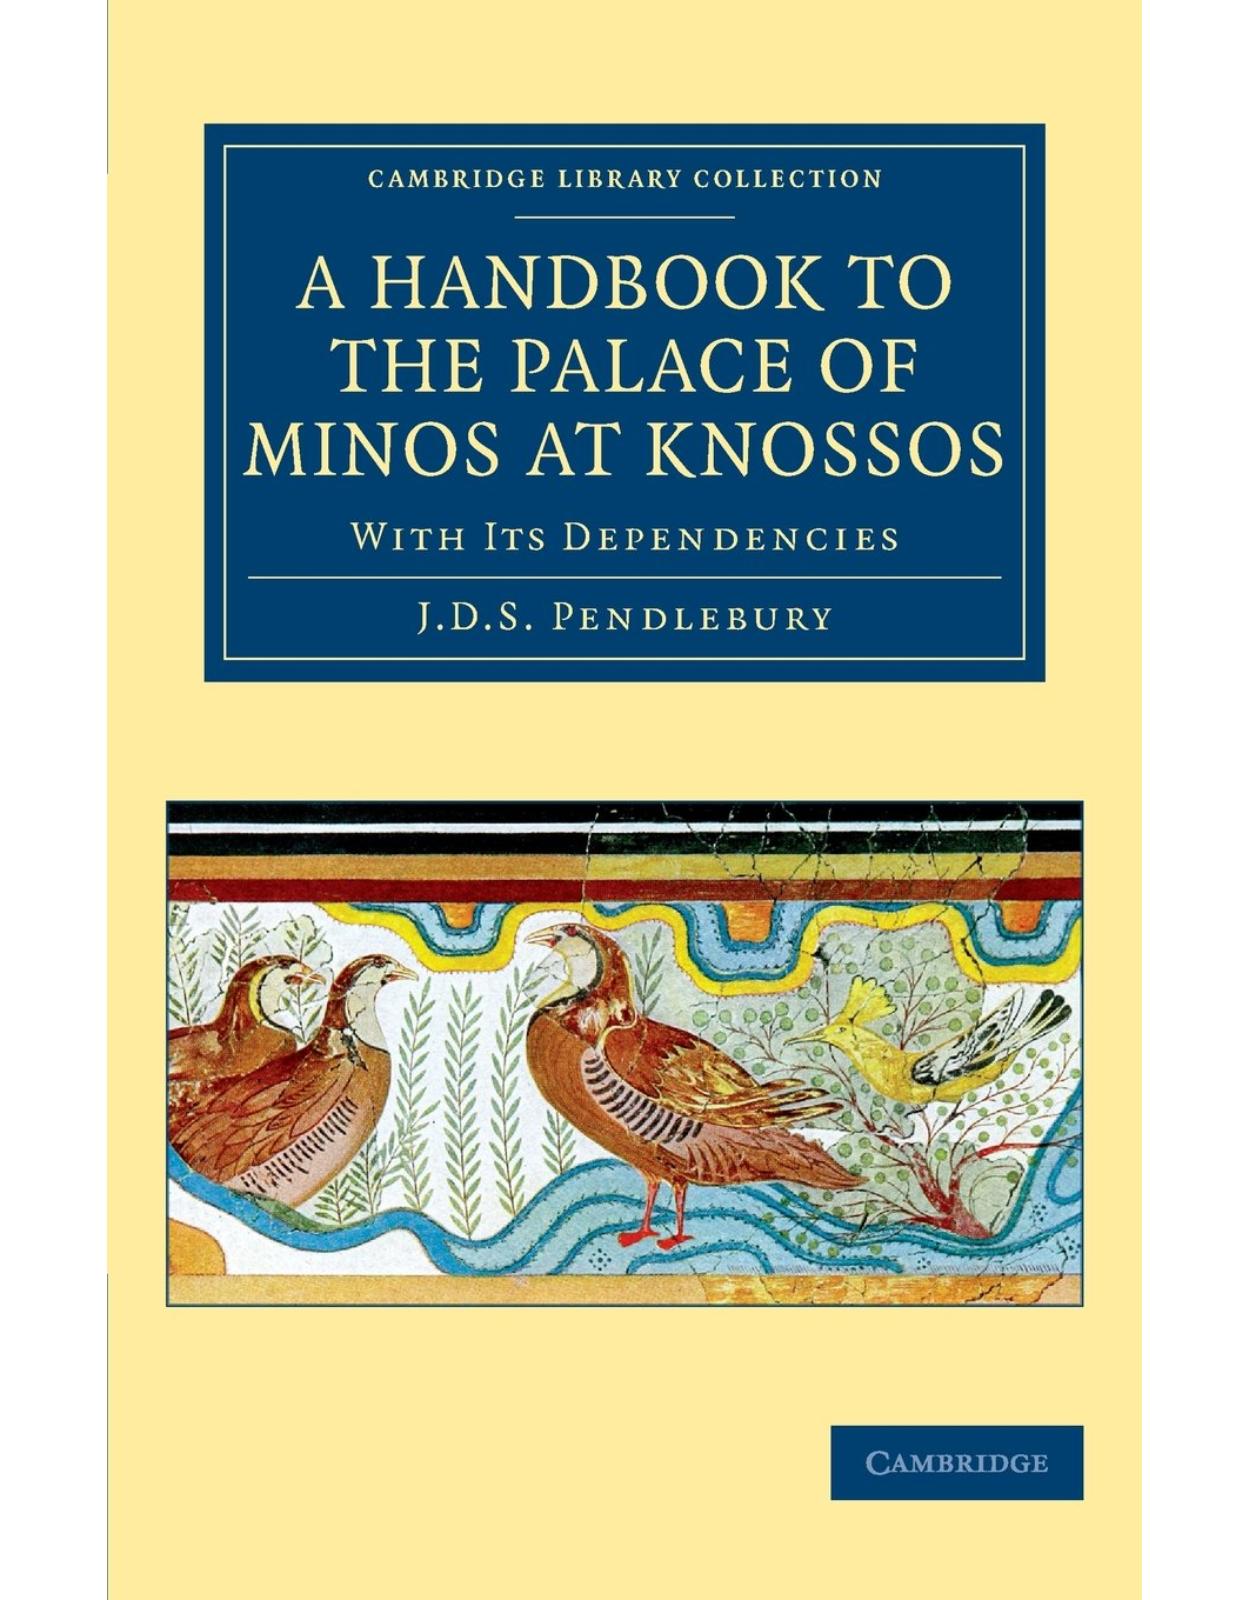 A Handbook to the Palace of Minos at Knossos: With its Dependencies (Cambridge Library Collection - Archaeology)